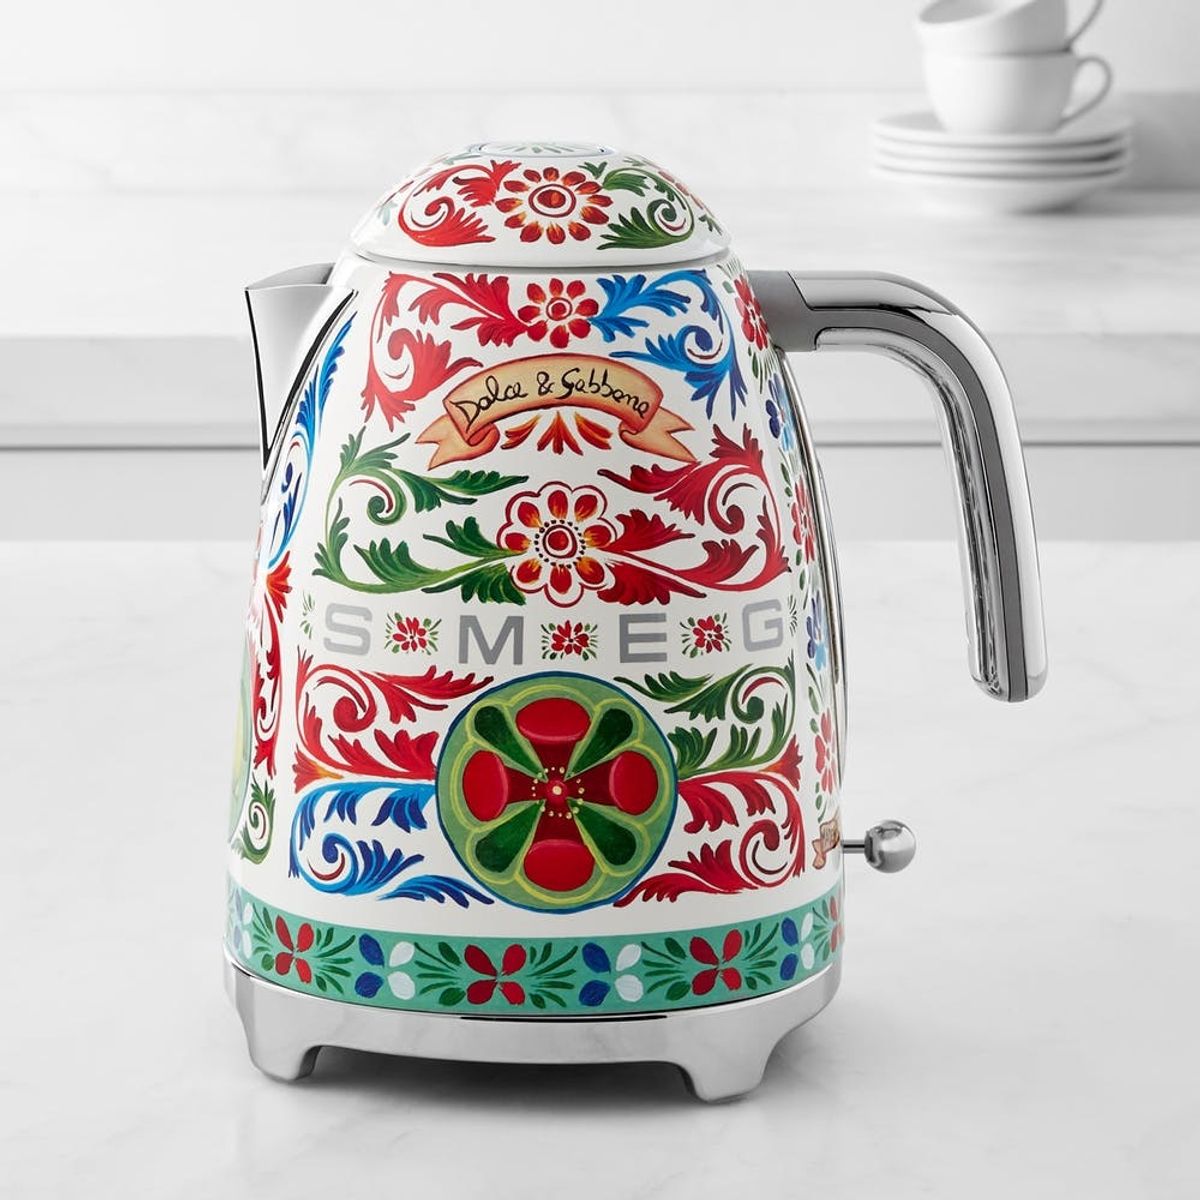 Dress Your Kitchen Counters With Designer “Apparel” via the New Smeg x Dolce & Gabbana Collection